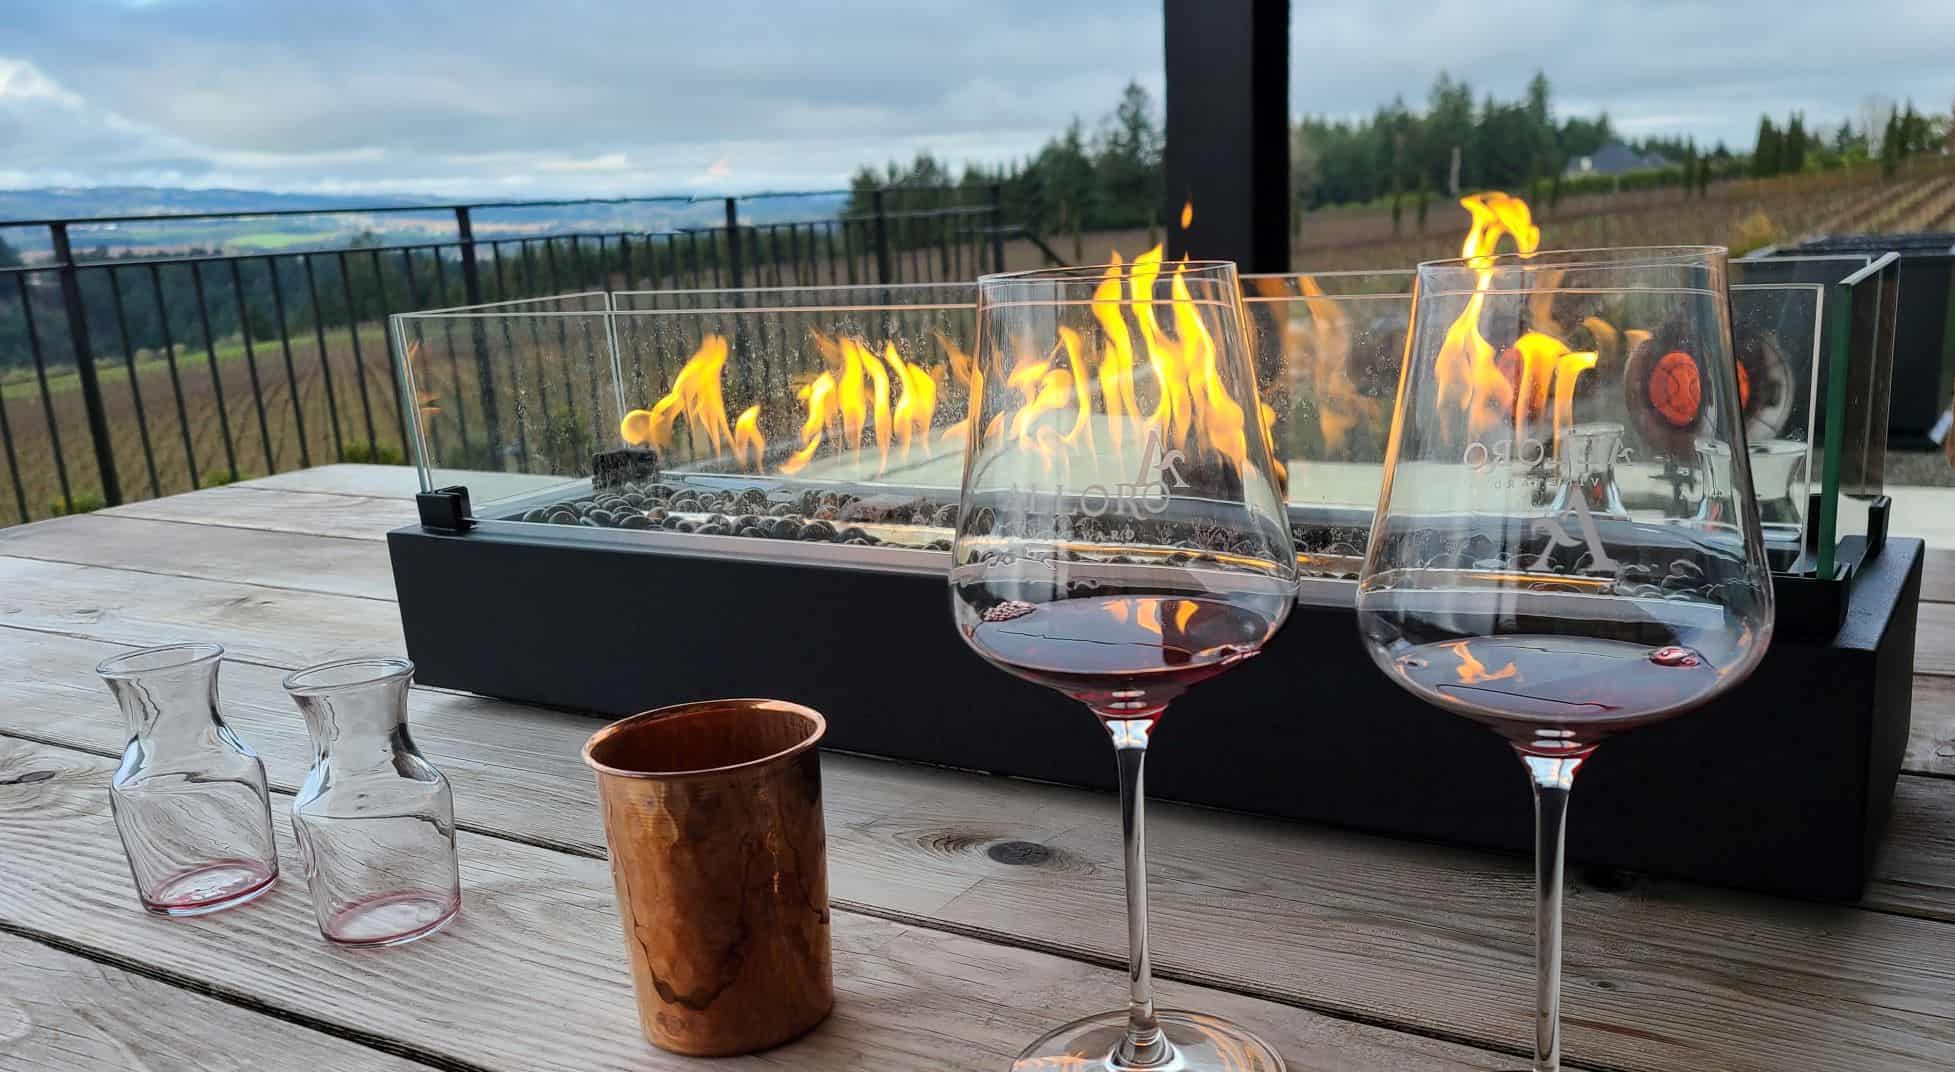 A cozy winter wine tasting at a Willamette Valley winery with wine glasses on a table outside with a tabletop fireplace.